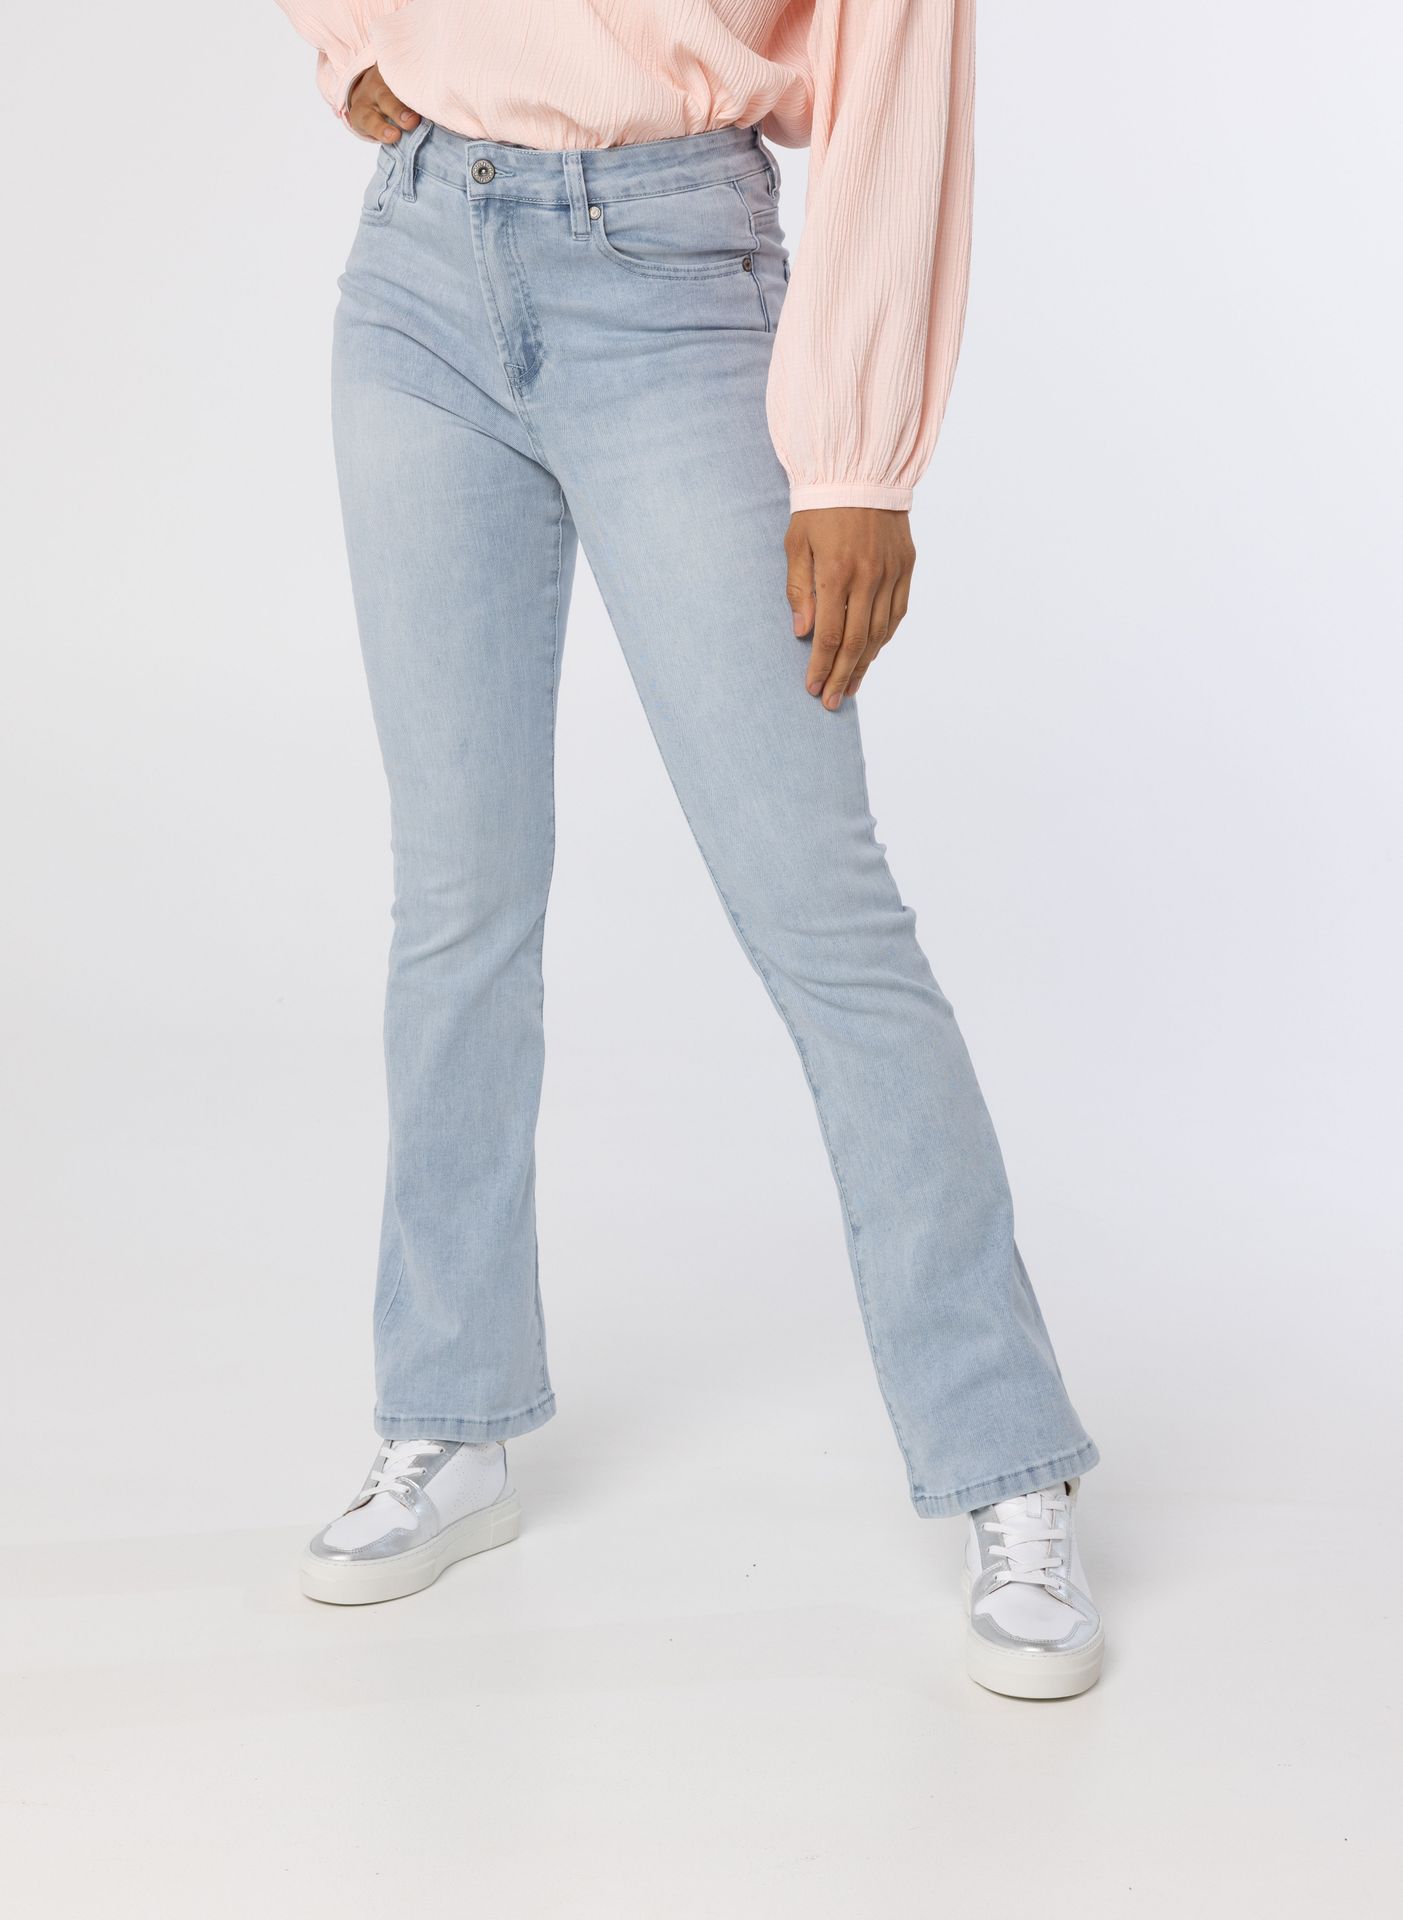 Norah Flared jeans blue 214039-400